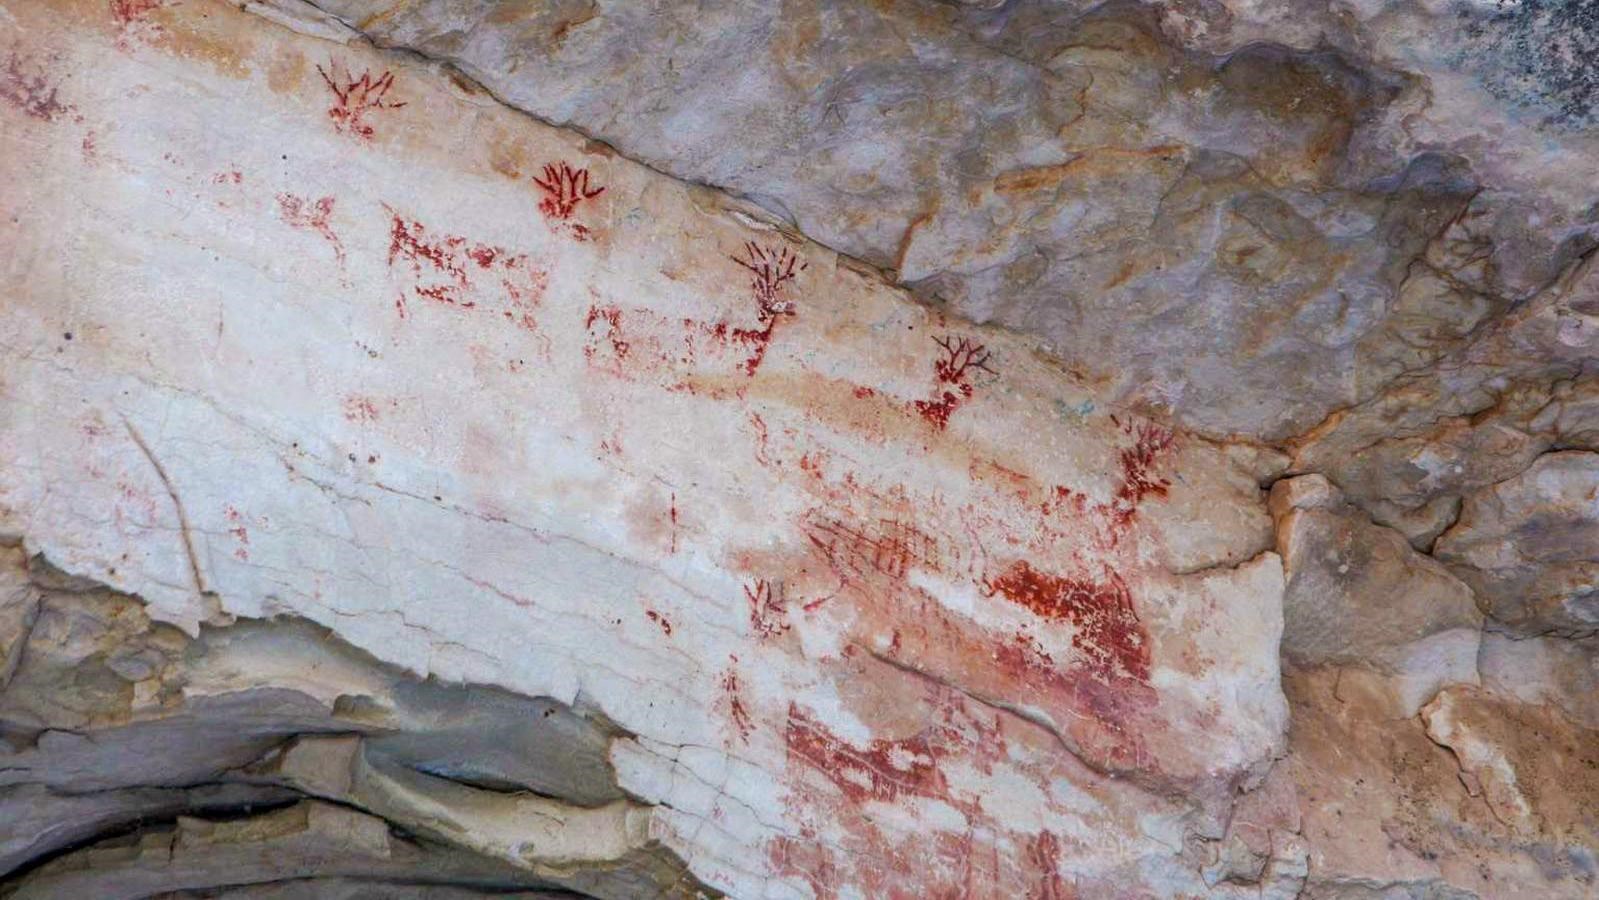 Under a limestone overhang, remnants of 6 deer in a row painted in red pigment a on rock wall. 